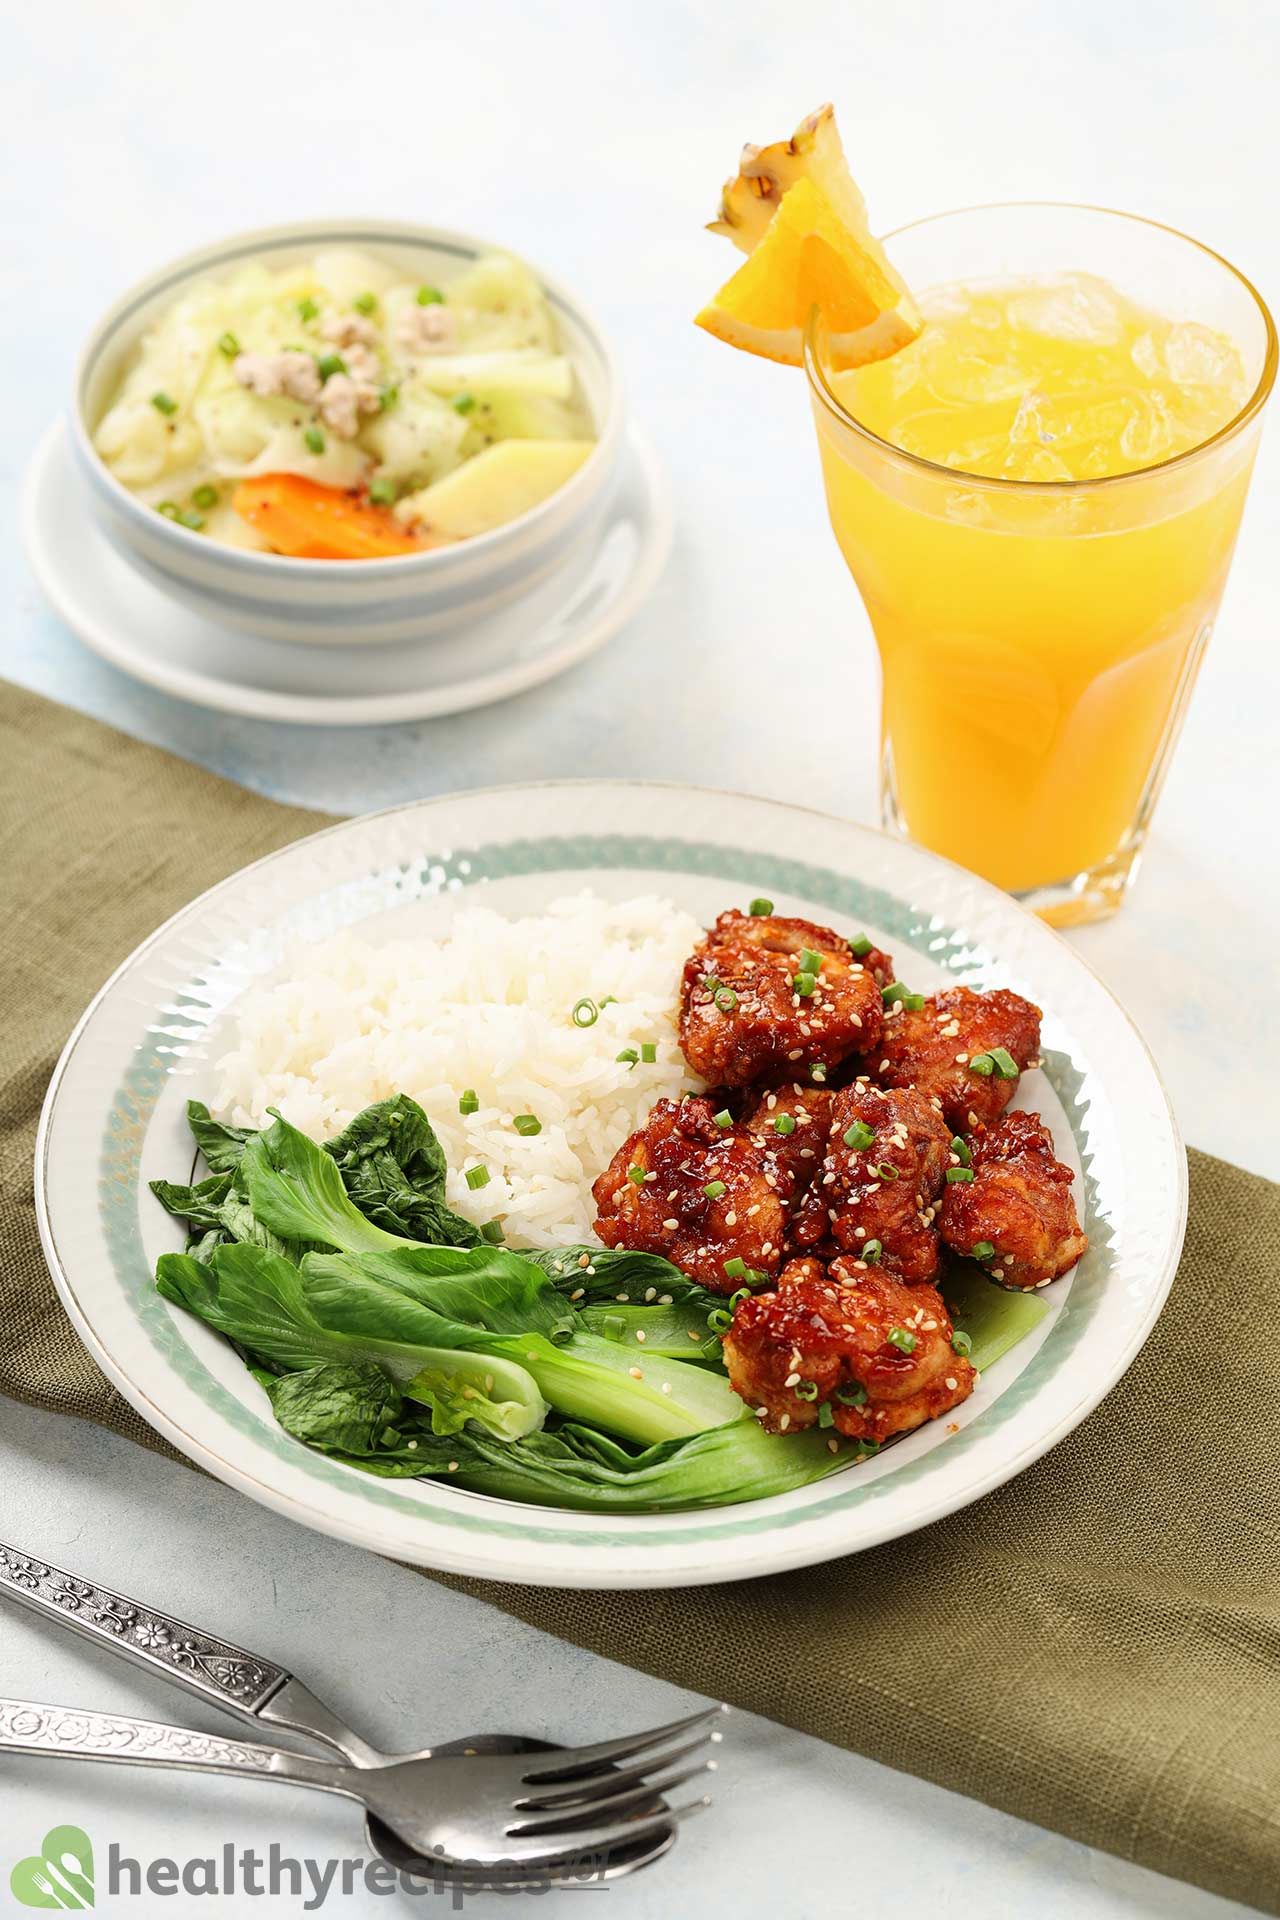 What to Serve With General Tso’s Chicken